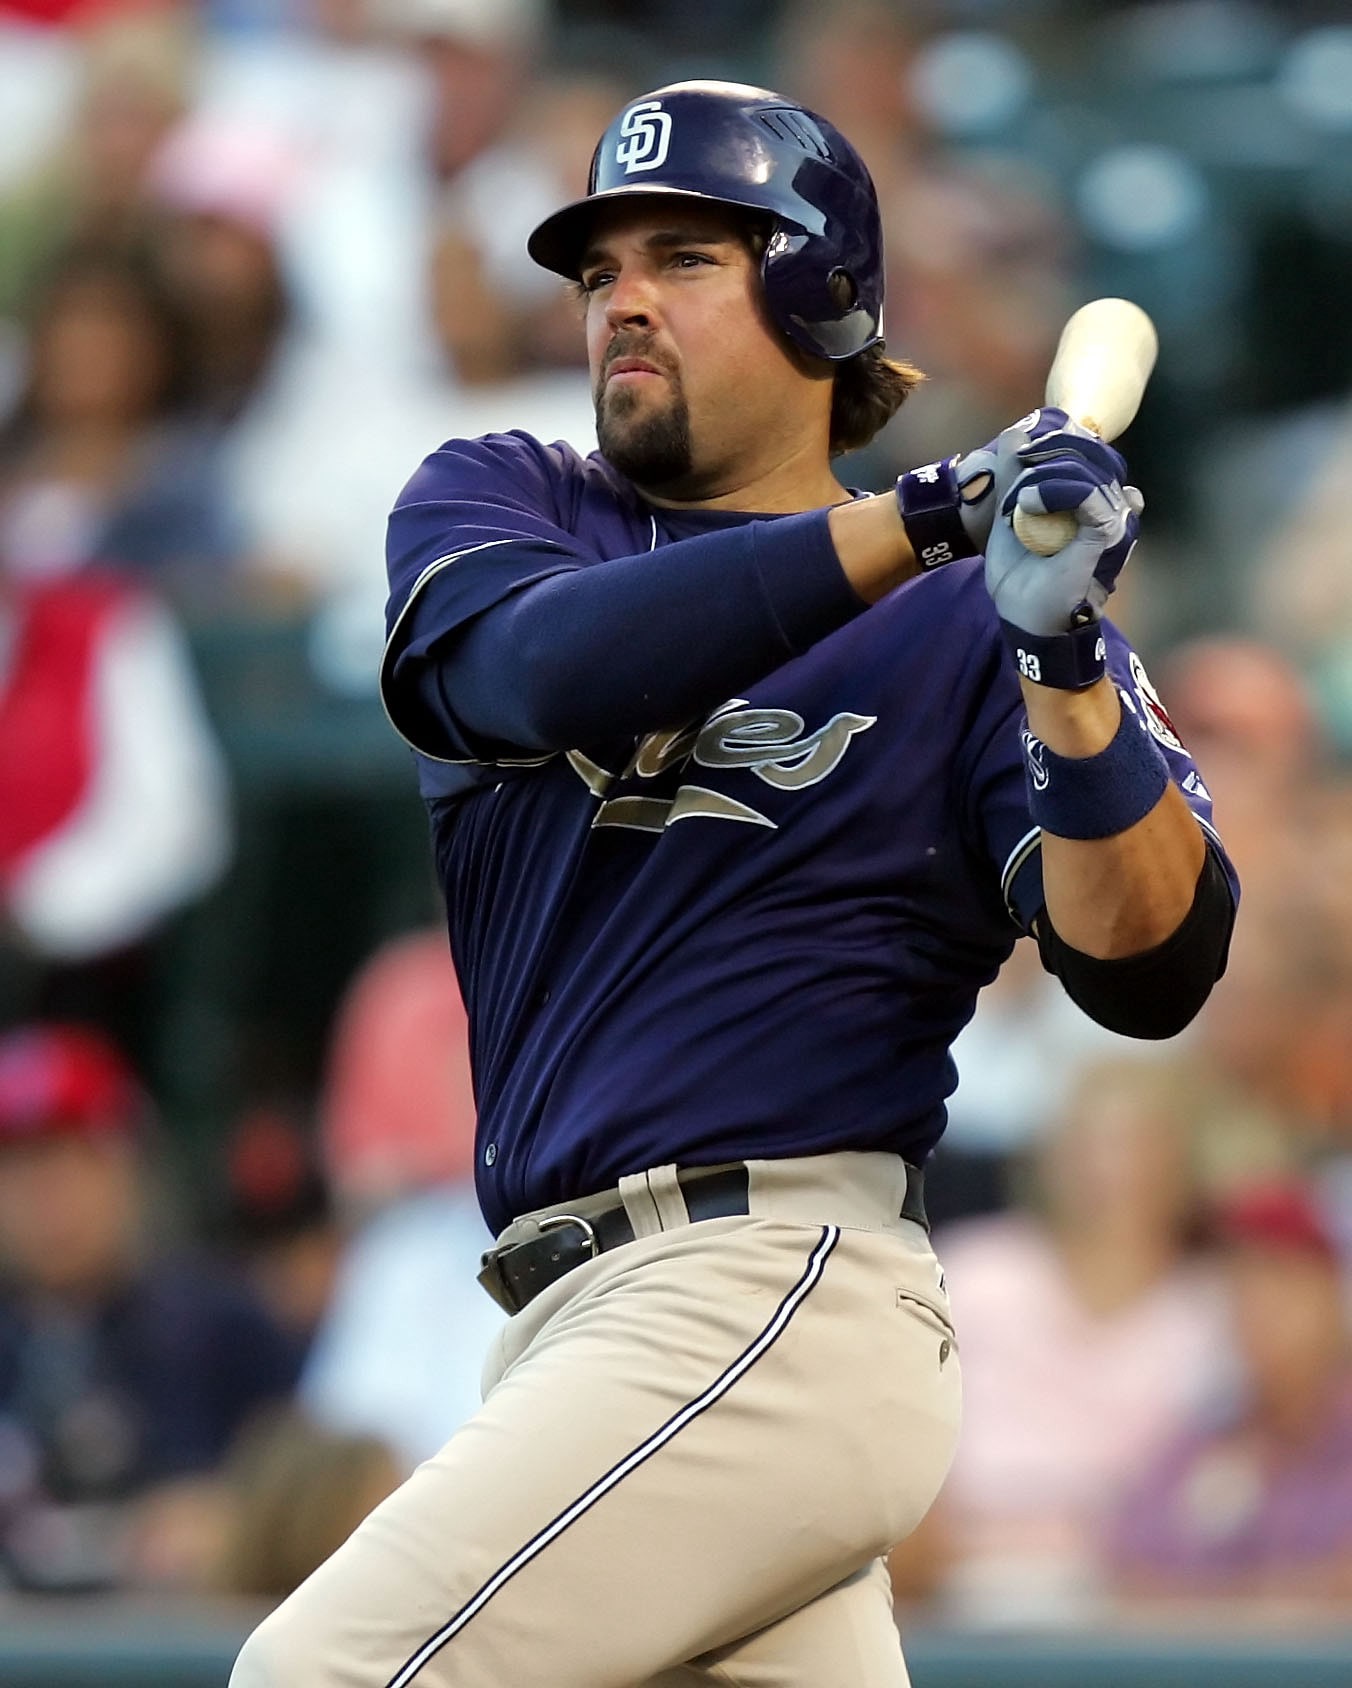 Mike Piazza playing as a member of the San Diego Padres